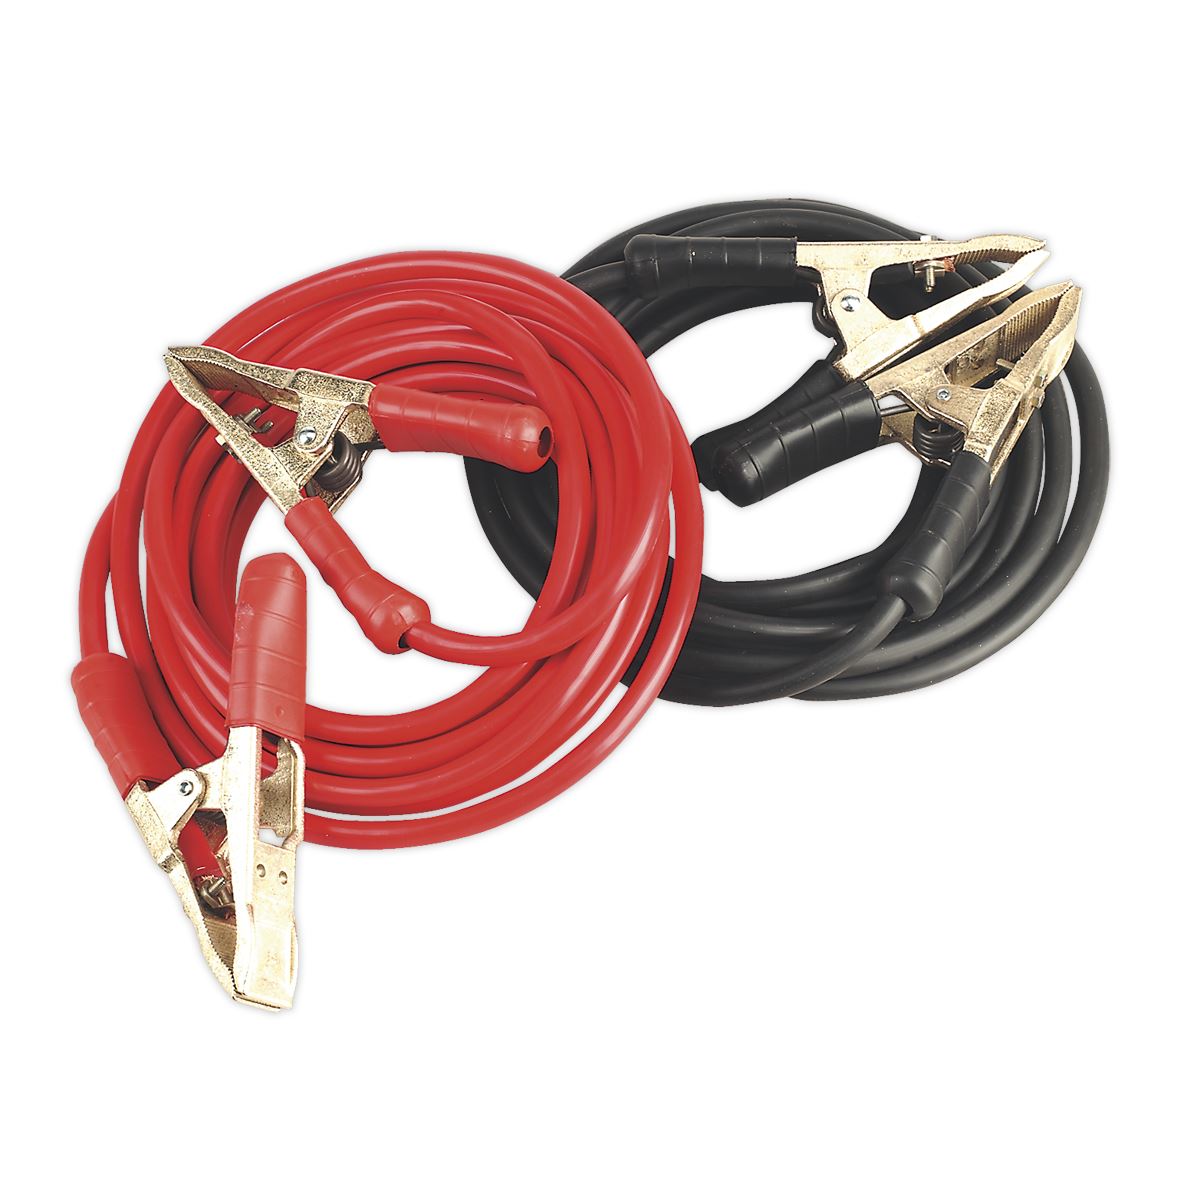 Sealey Booster Cables Extra-Heavy-Duty Clamps 50mm² x 6.5m Copper 900A